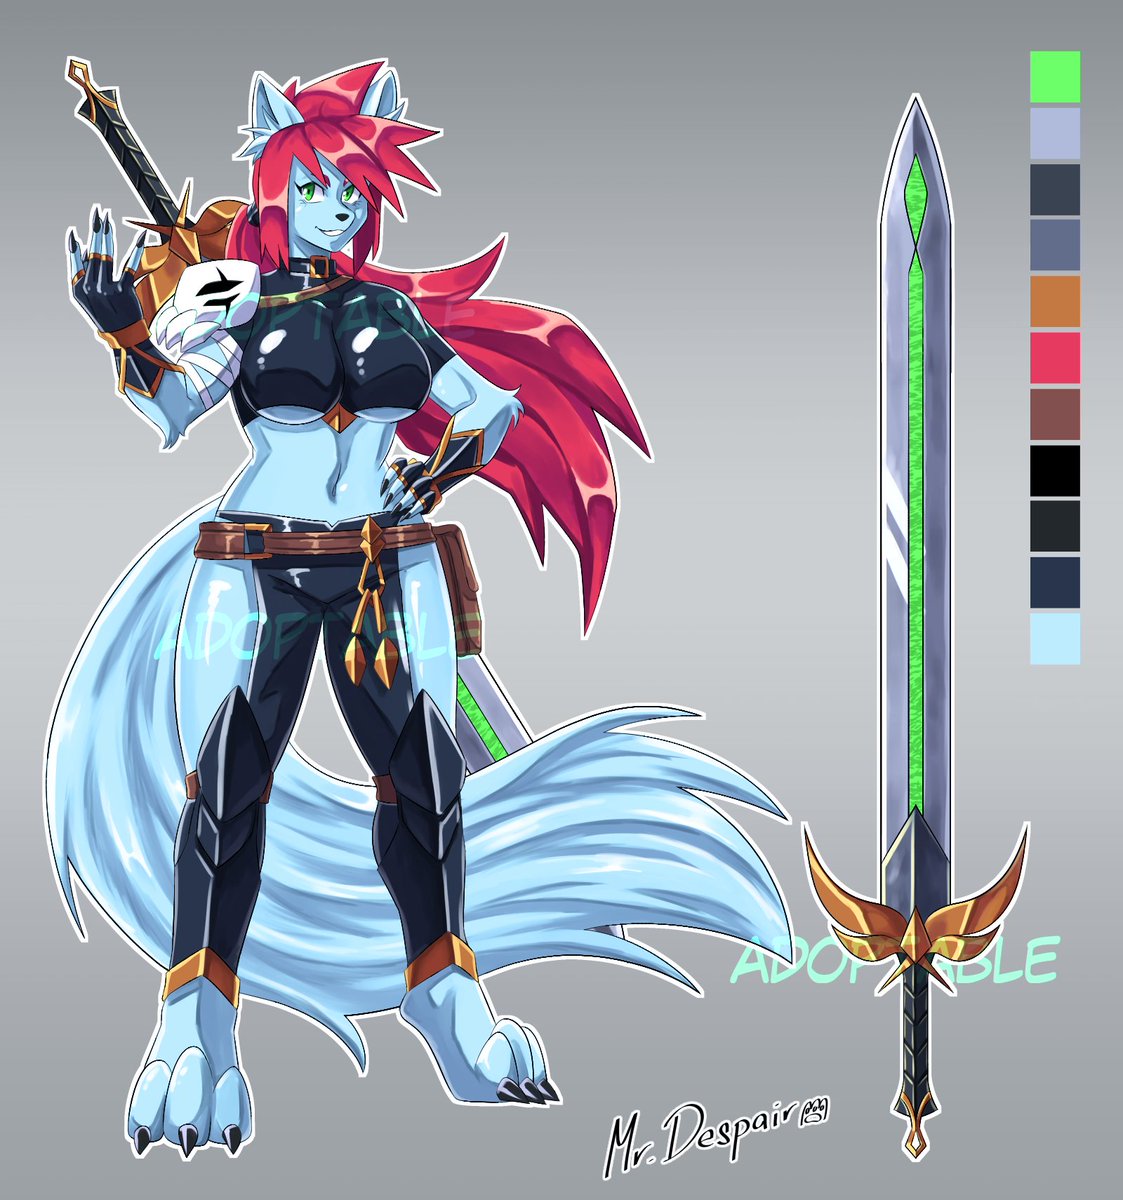 FIGHTER ADOPTABLE
Link in comments

#adopt #adopts #adoptable #auction #openauction #openadoptable #originalcharacter #adoptableauction #ocadoptable #cute #anthro #adoptables #wolf #fox #female #forsale #paypal #oc #wolfadoptable #furry #characterforsale #fantasy #warrior #sword